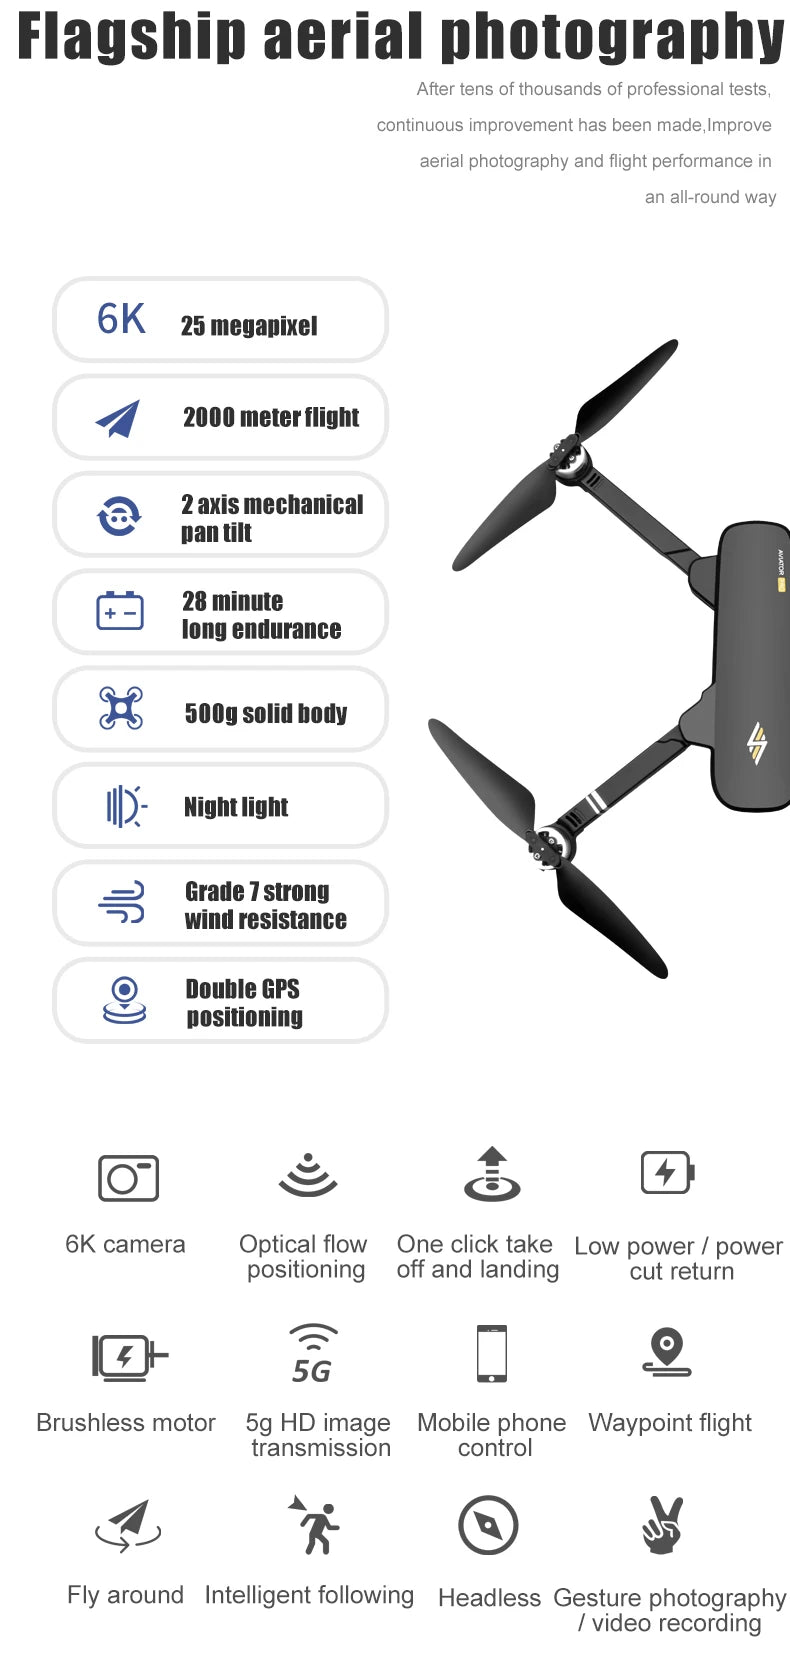 8811 Pro Drone, Flagship aerial photography After tens of thousands of professional tests, continuous improvement has been made